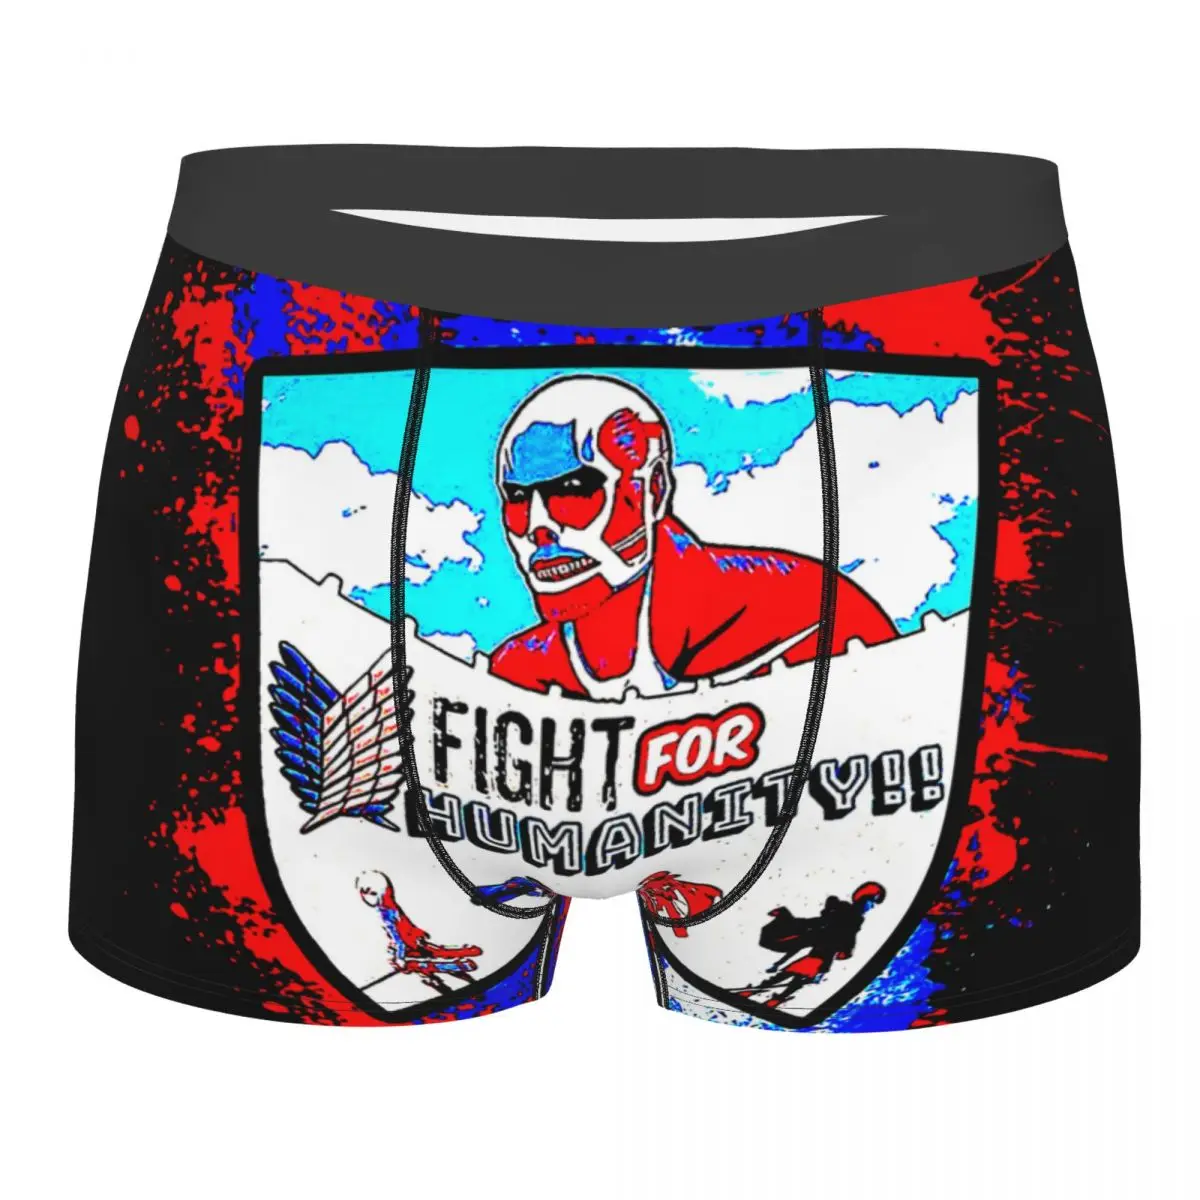 

Attack on Titan Titans Anime Television Series Fight For Humanity Underpants Homme Pants Male Underwear Sexy Shorts Boxer Briefs